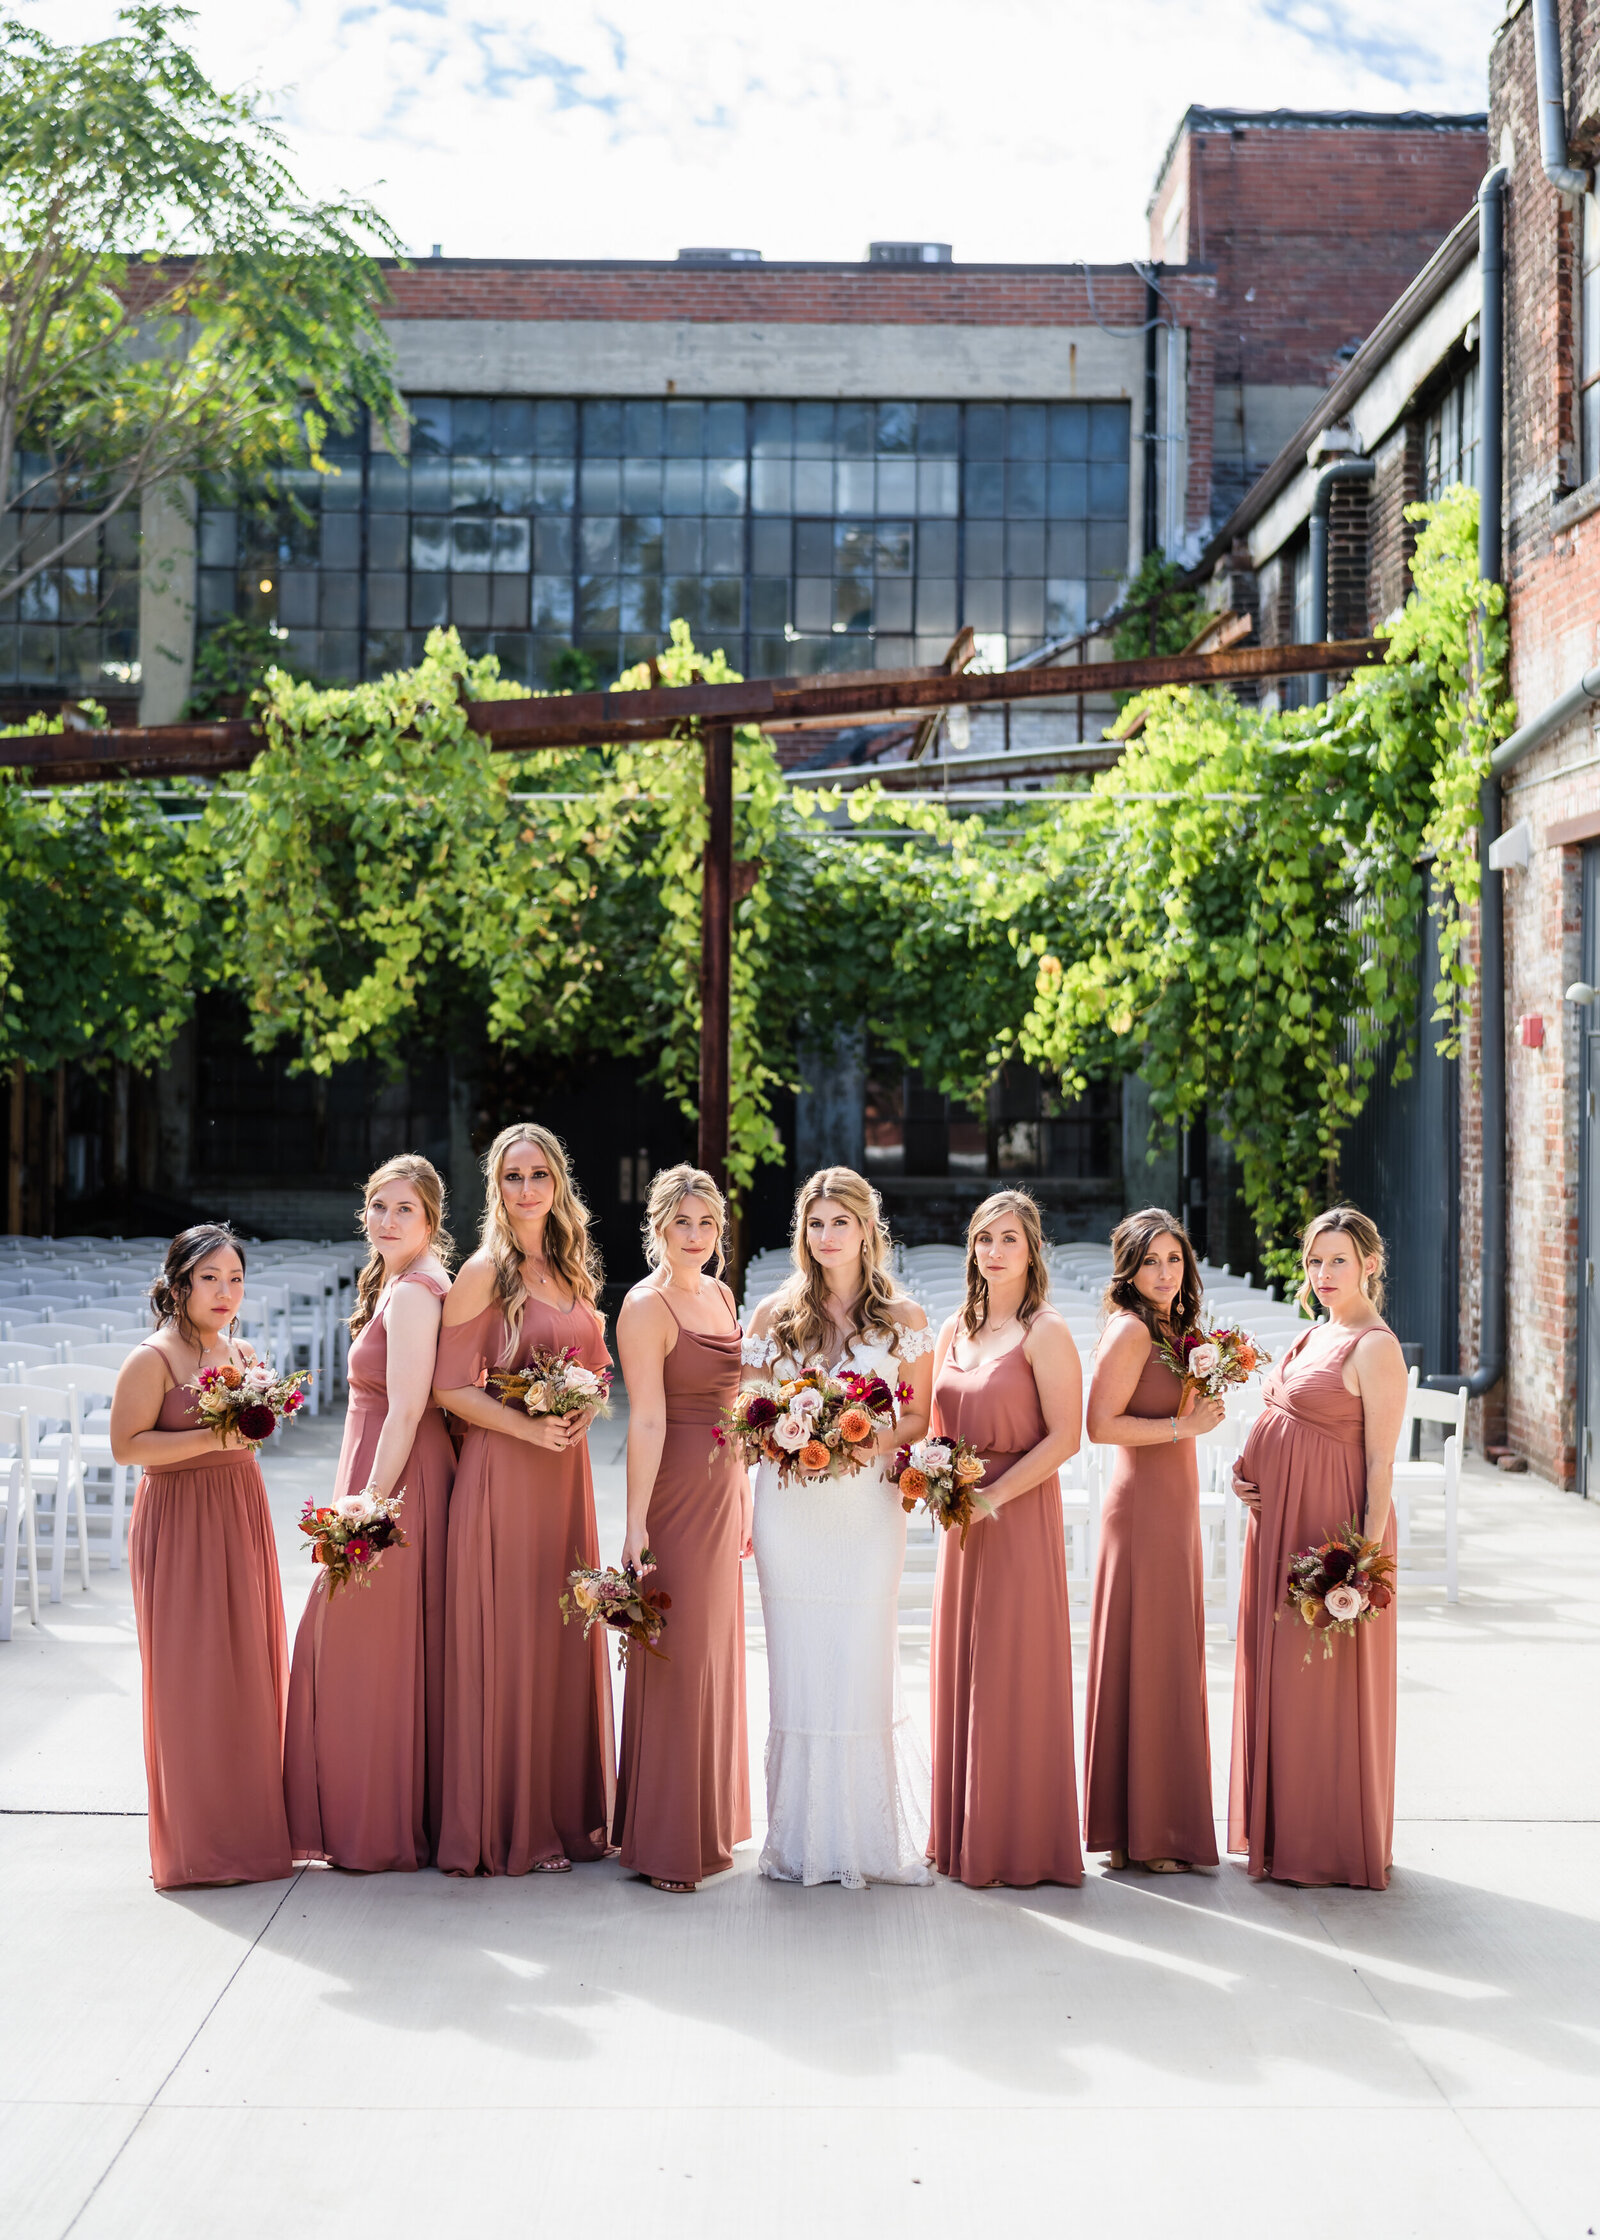 The bride and her bridesmaids pose in the courtyard at Strongwater